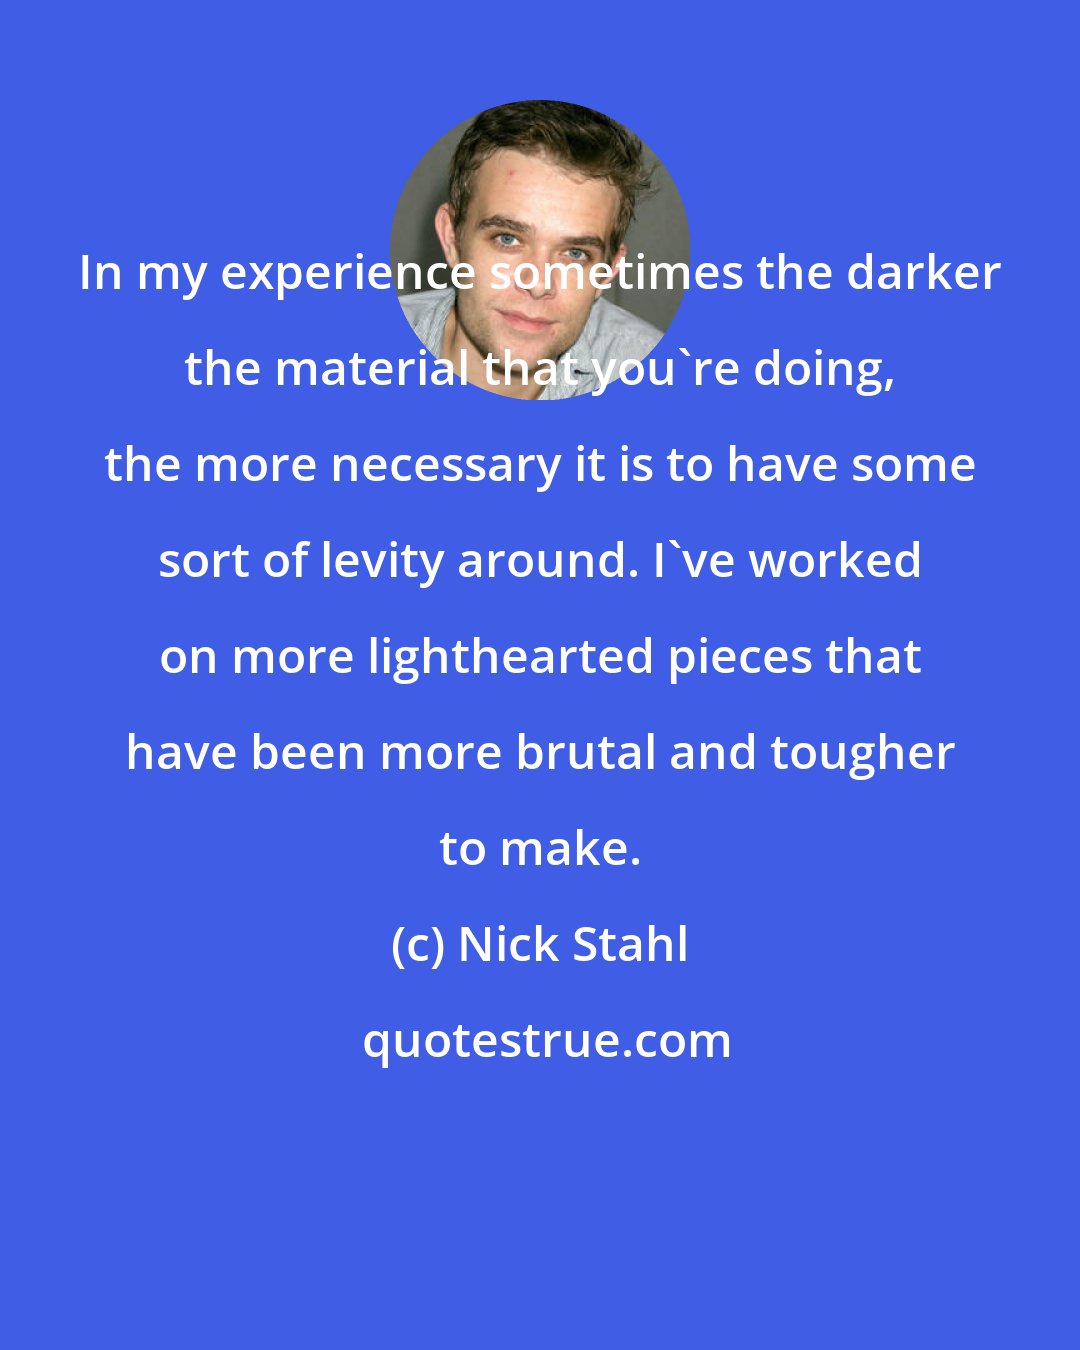 Nick Stahl: In my experience sometimes the darker the material that you're doing, the more necessary it is to have some sort of levity around. I've worked on more lighthearted pieces that have been more brutal and tougher to make.